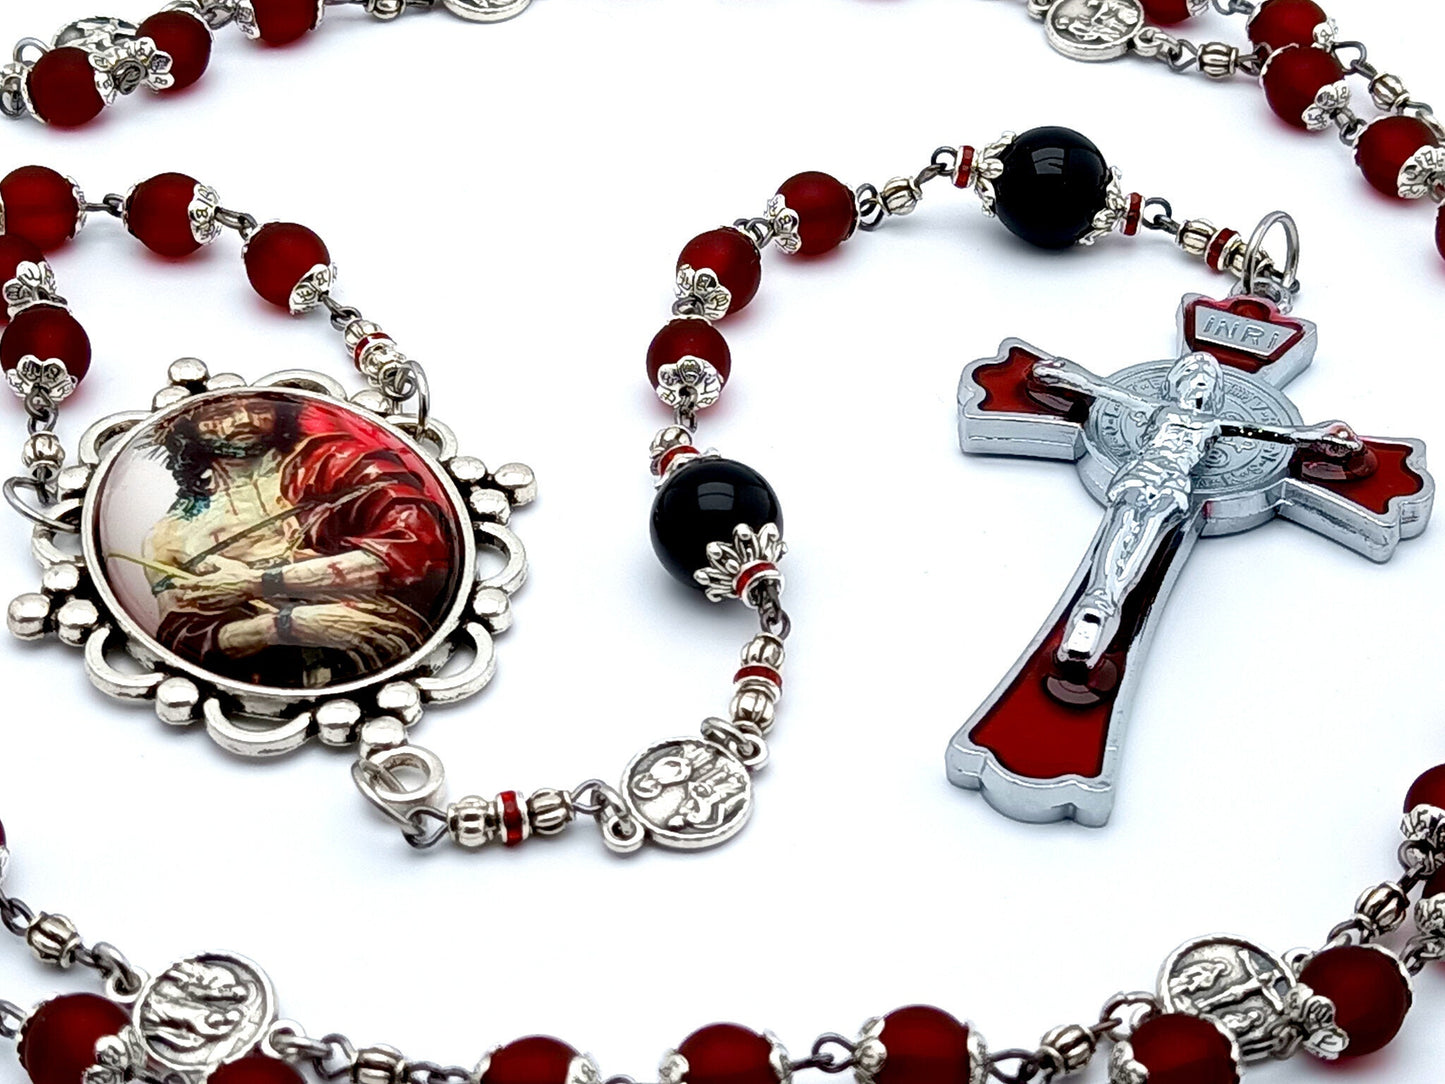 Passion of Christ unique rosary beads stations of the cross with red glass and onyx gemstone beads, Way of the Cross medals and red enamel Saint Benedict crucifix.